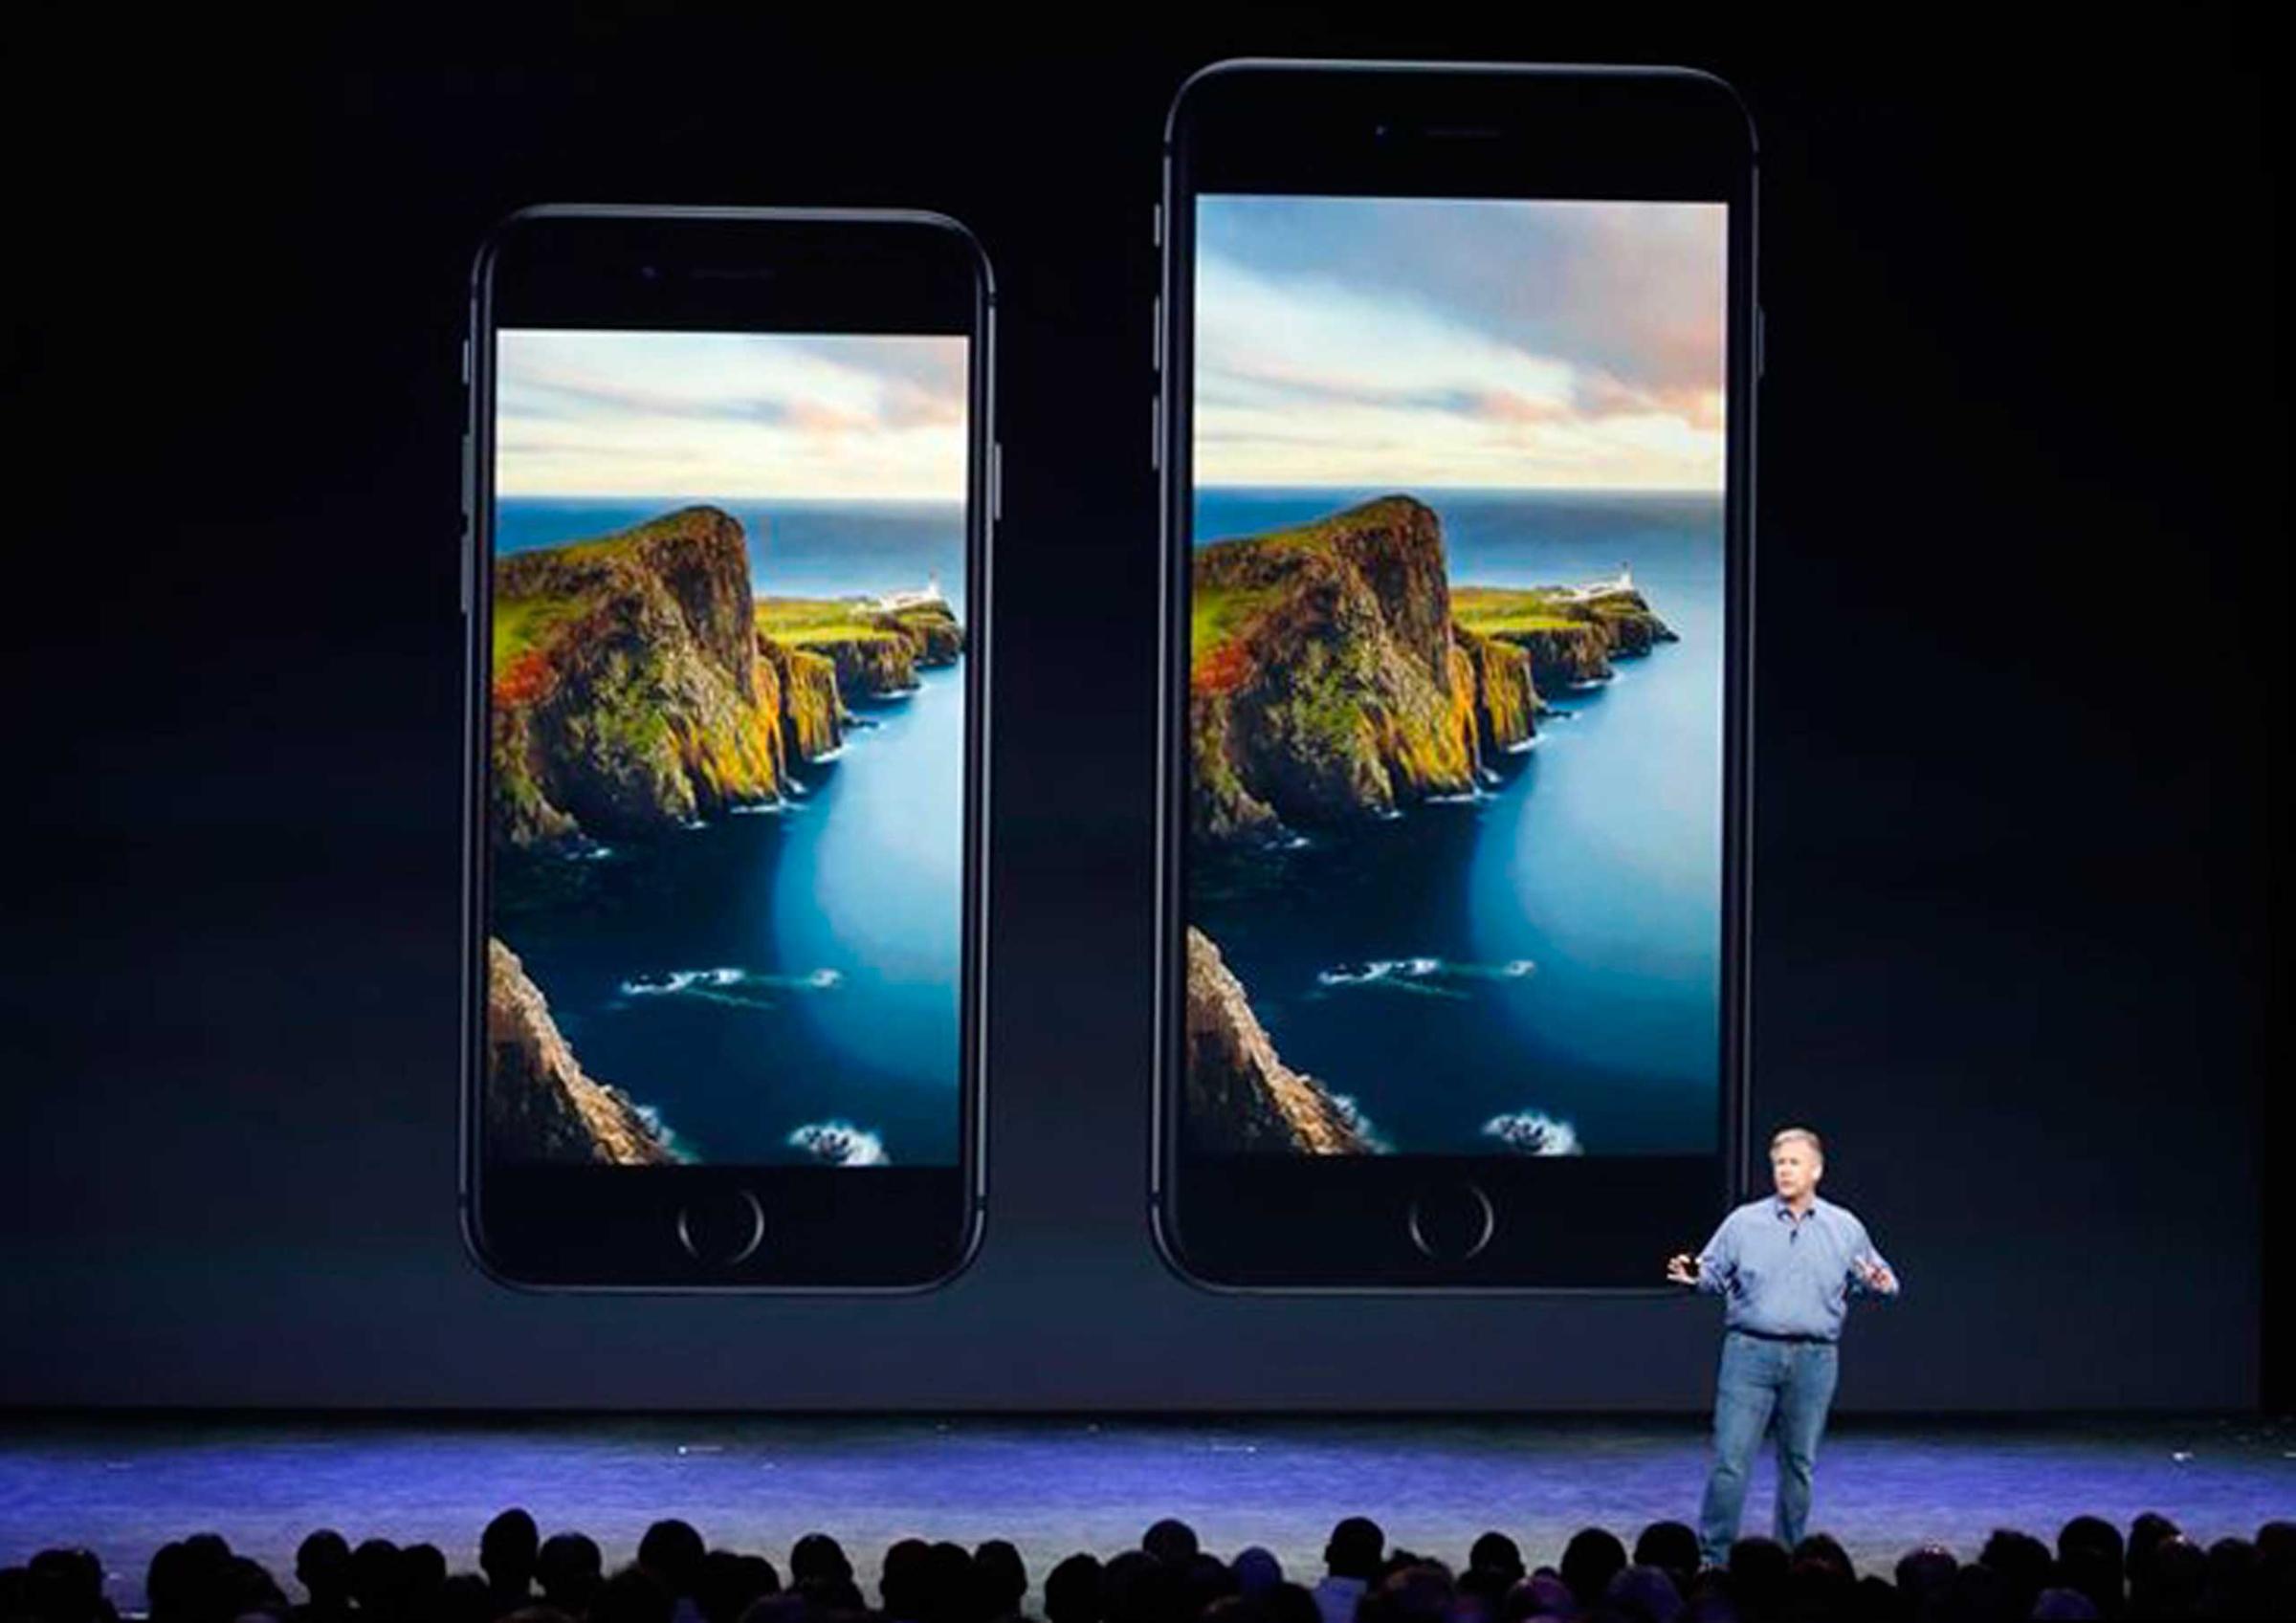 Phil Schiller, Senior Vice President at Apple, Inc. speaks about the iPhone 6 and the iPhone 6 Plus during an Apple event at the Flint Center in Cupertino